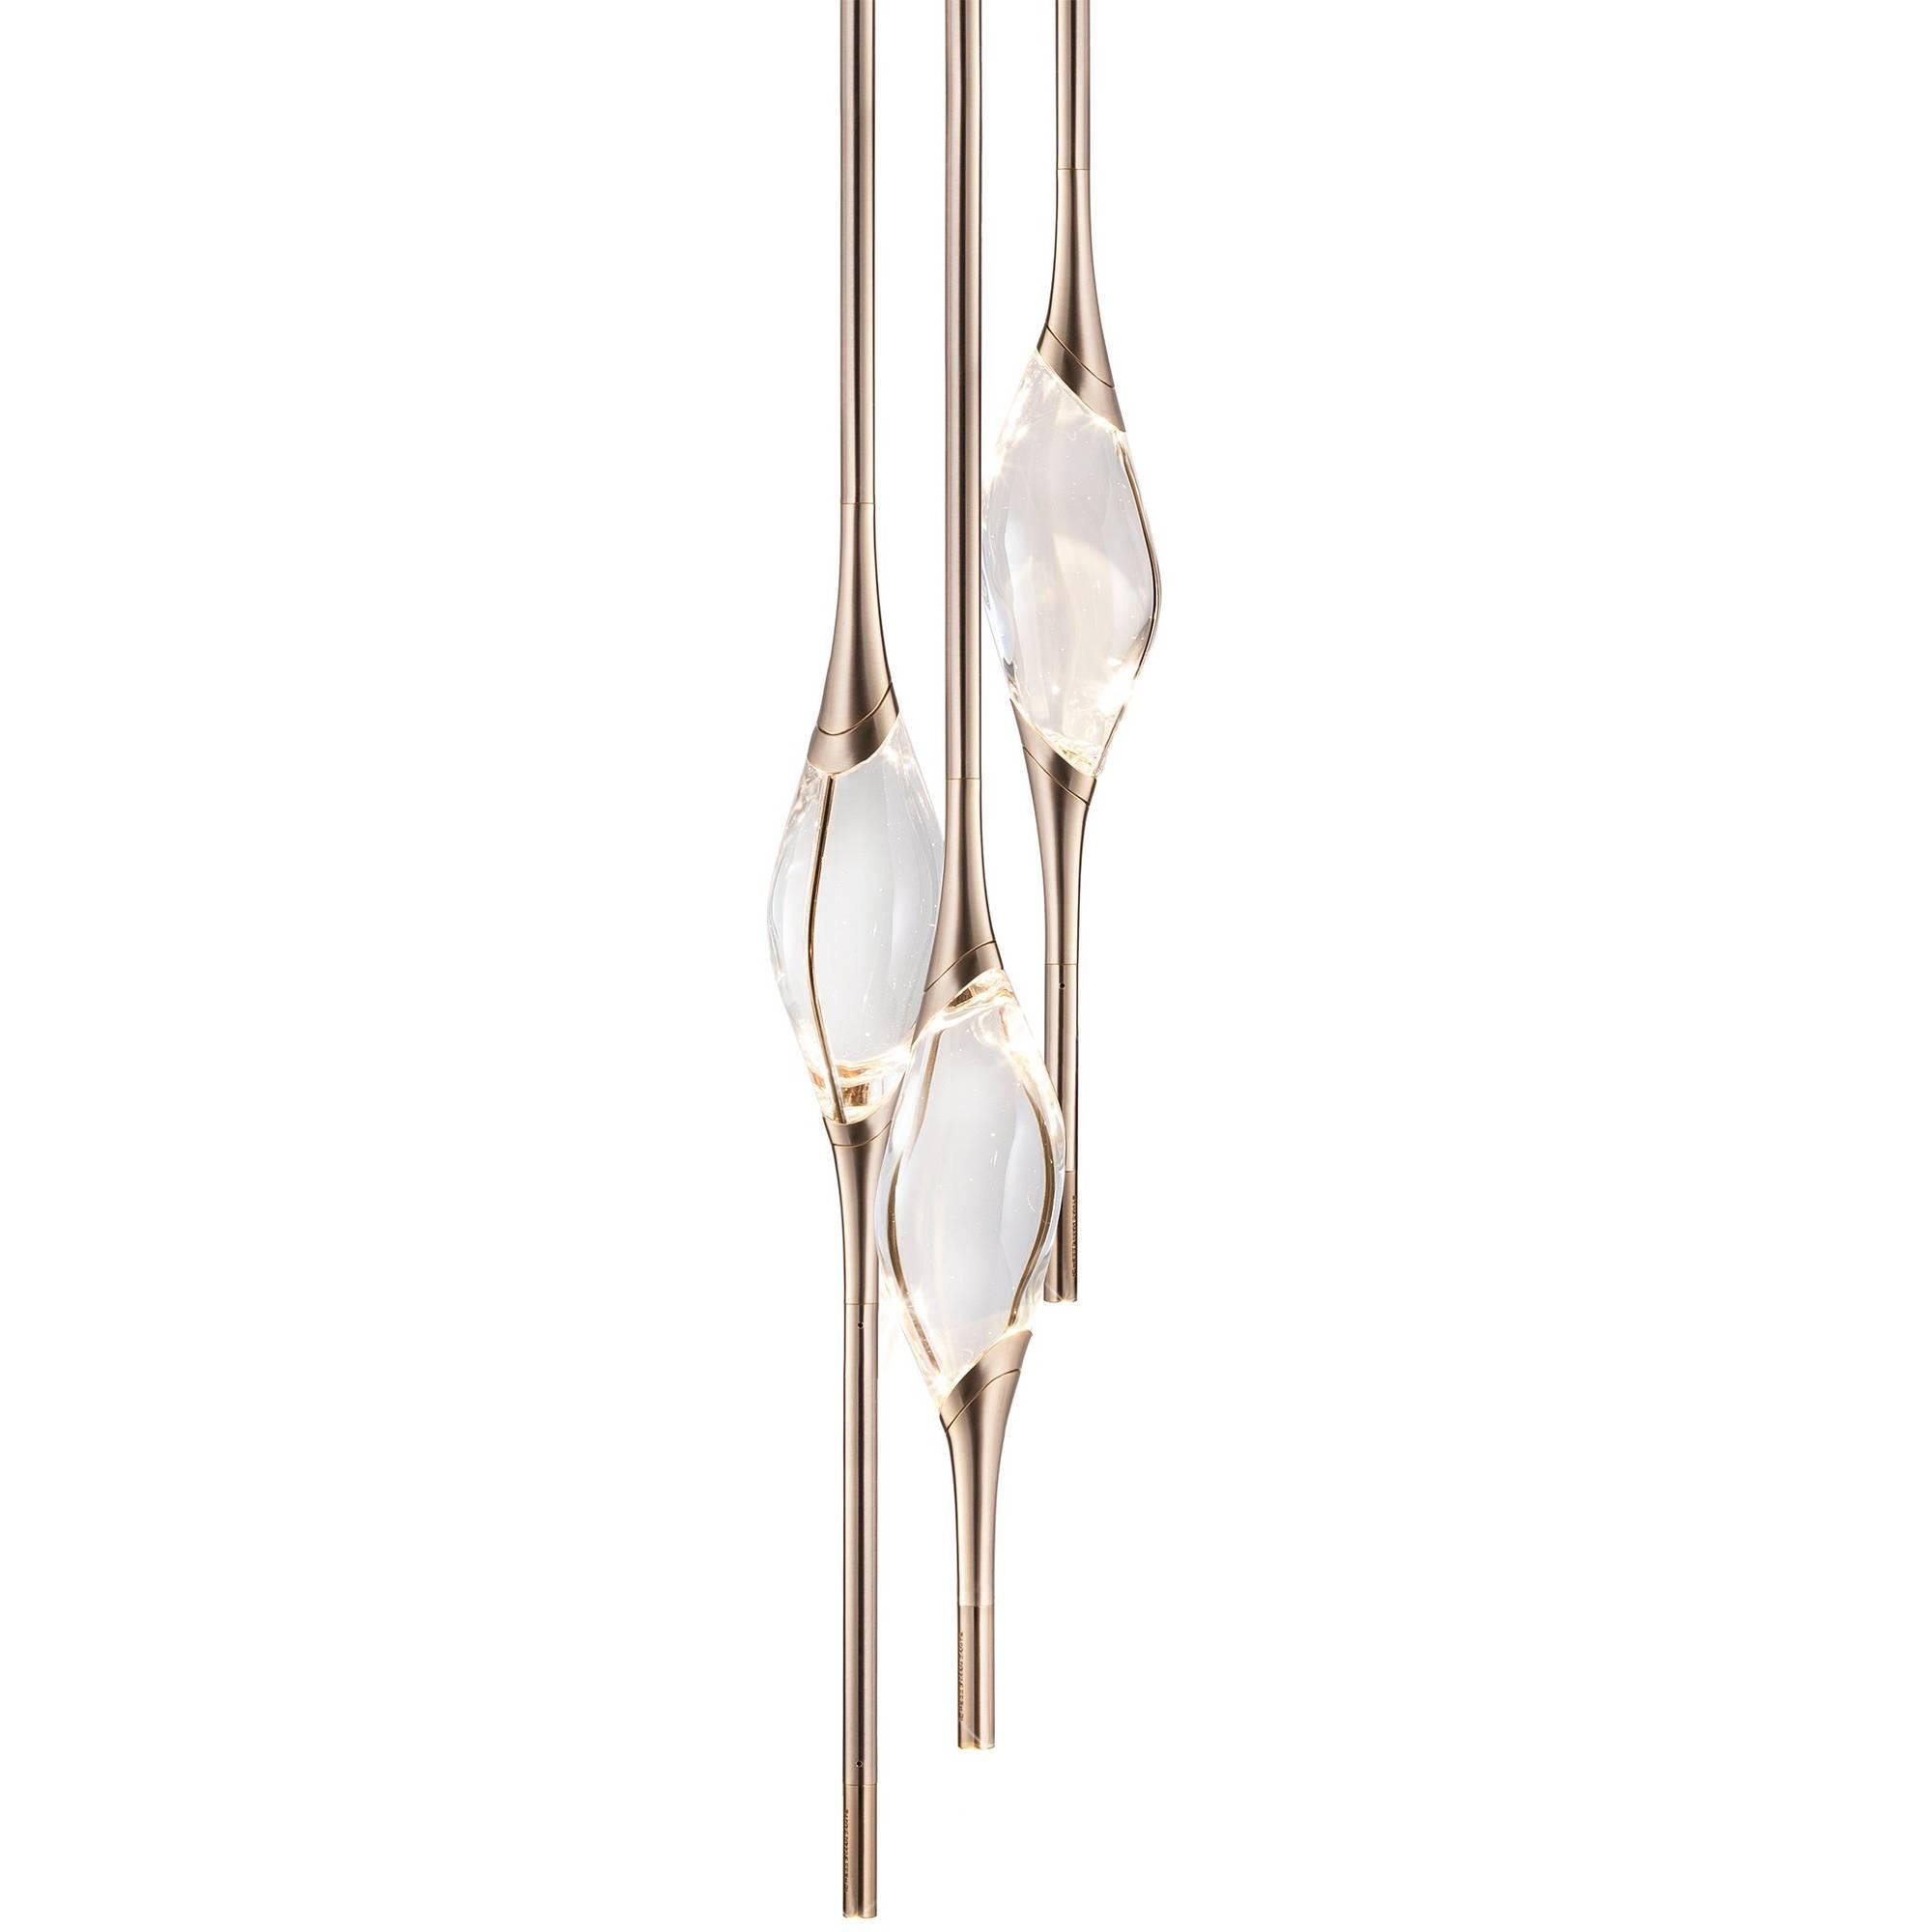 "Il Pezzo 12 Round Chandelier" LED Lamp in Champagne Finish and Crystal